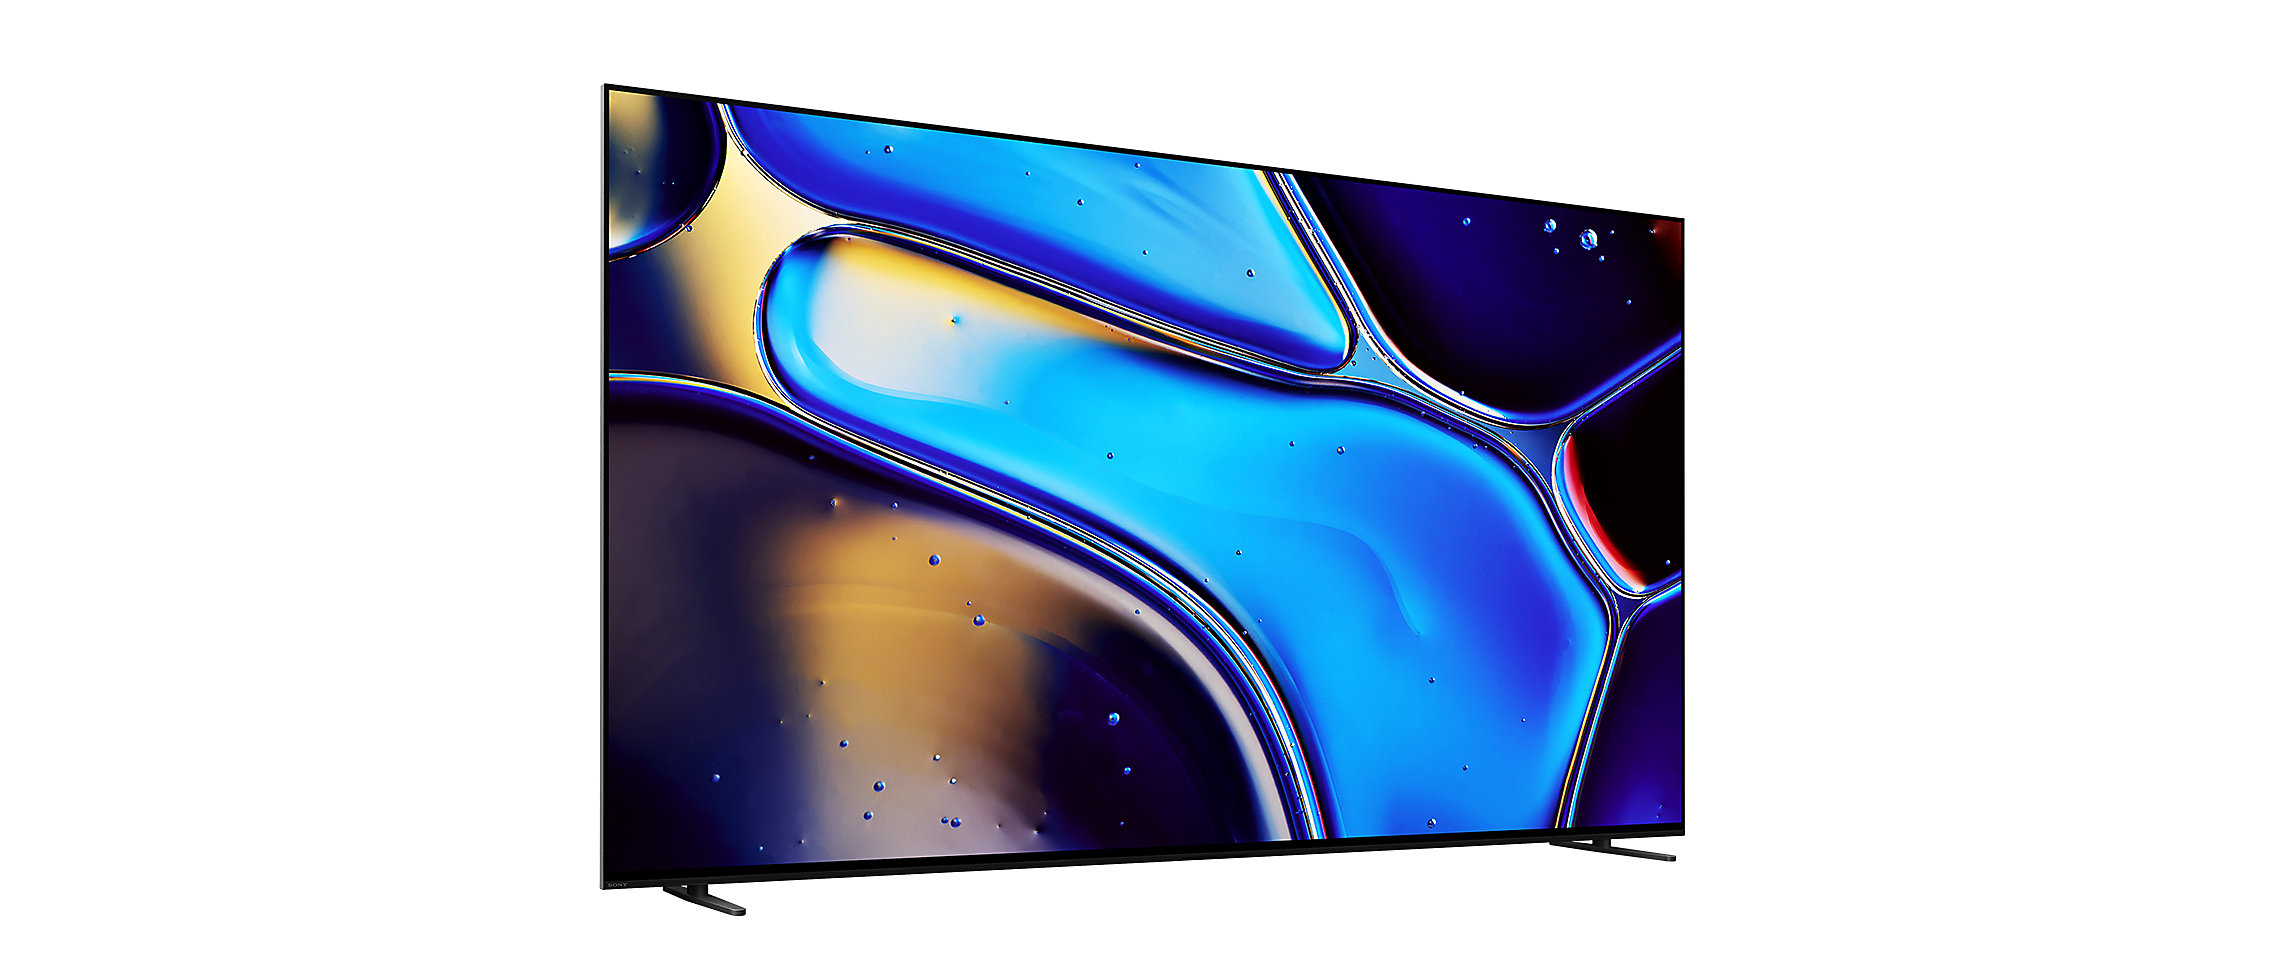 Right front angled view of BRAVIA 8 with screenshot of blue water droplets